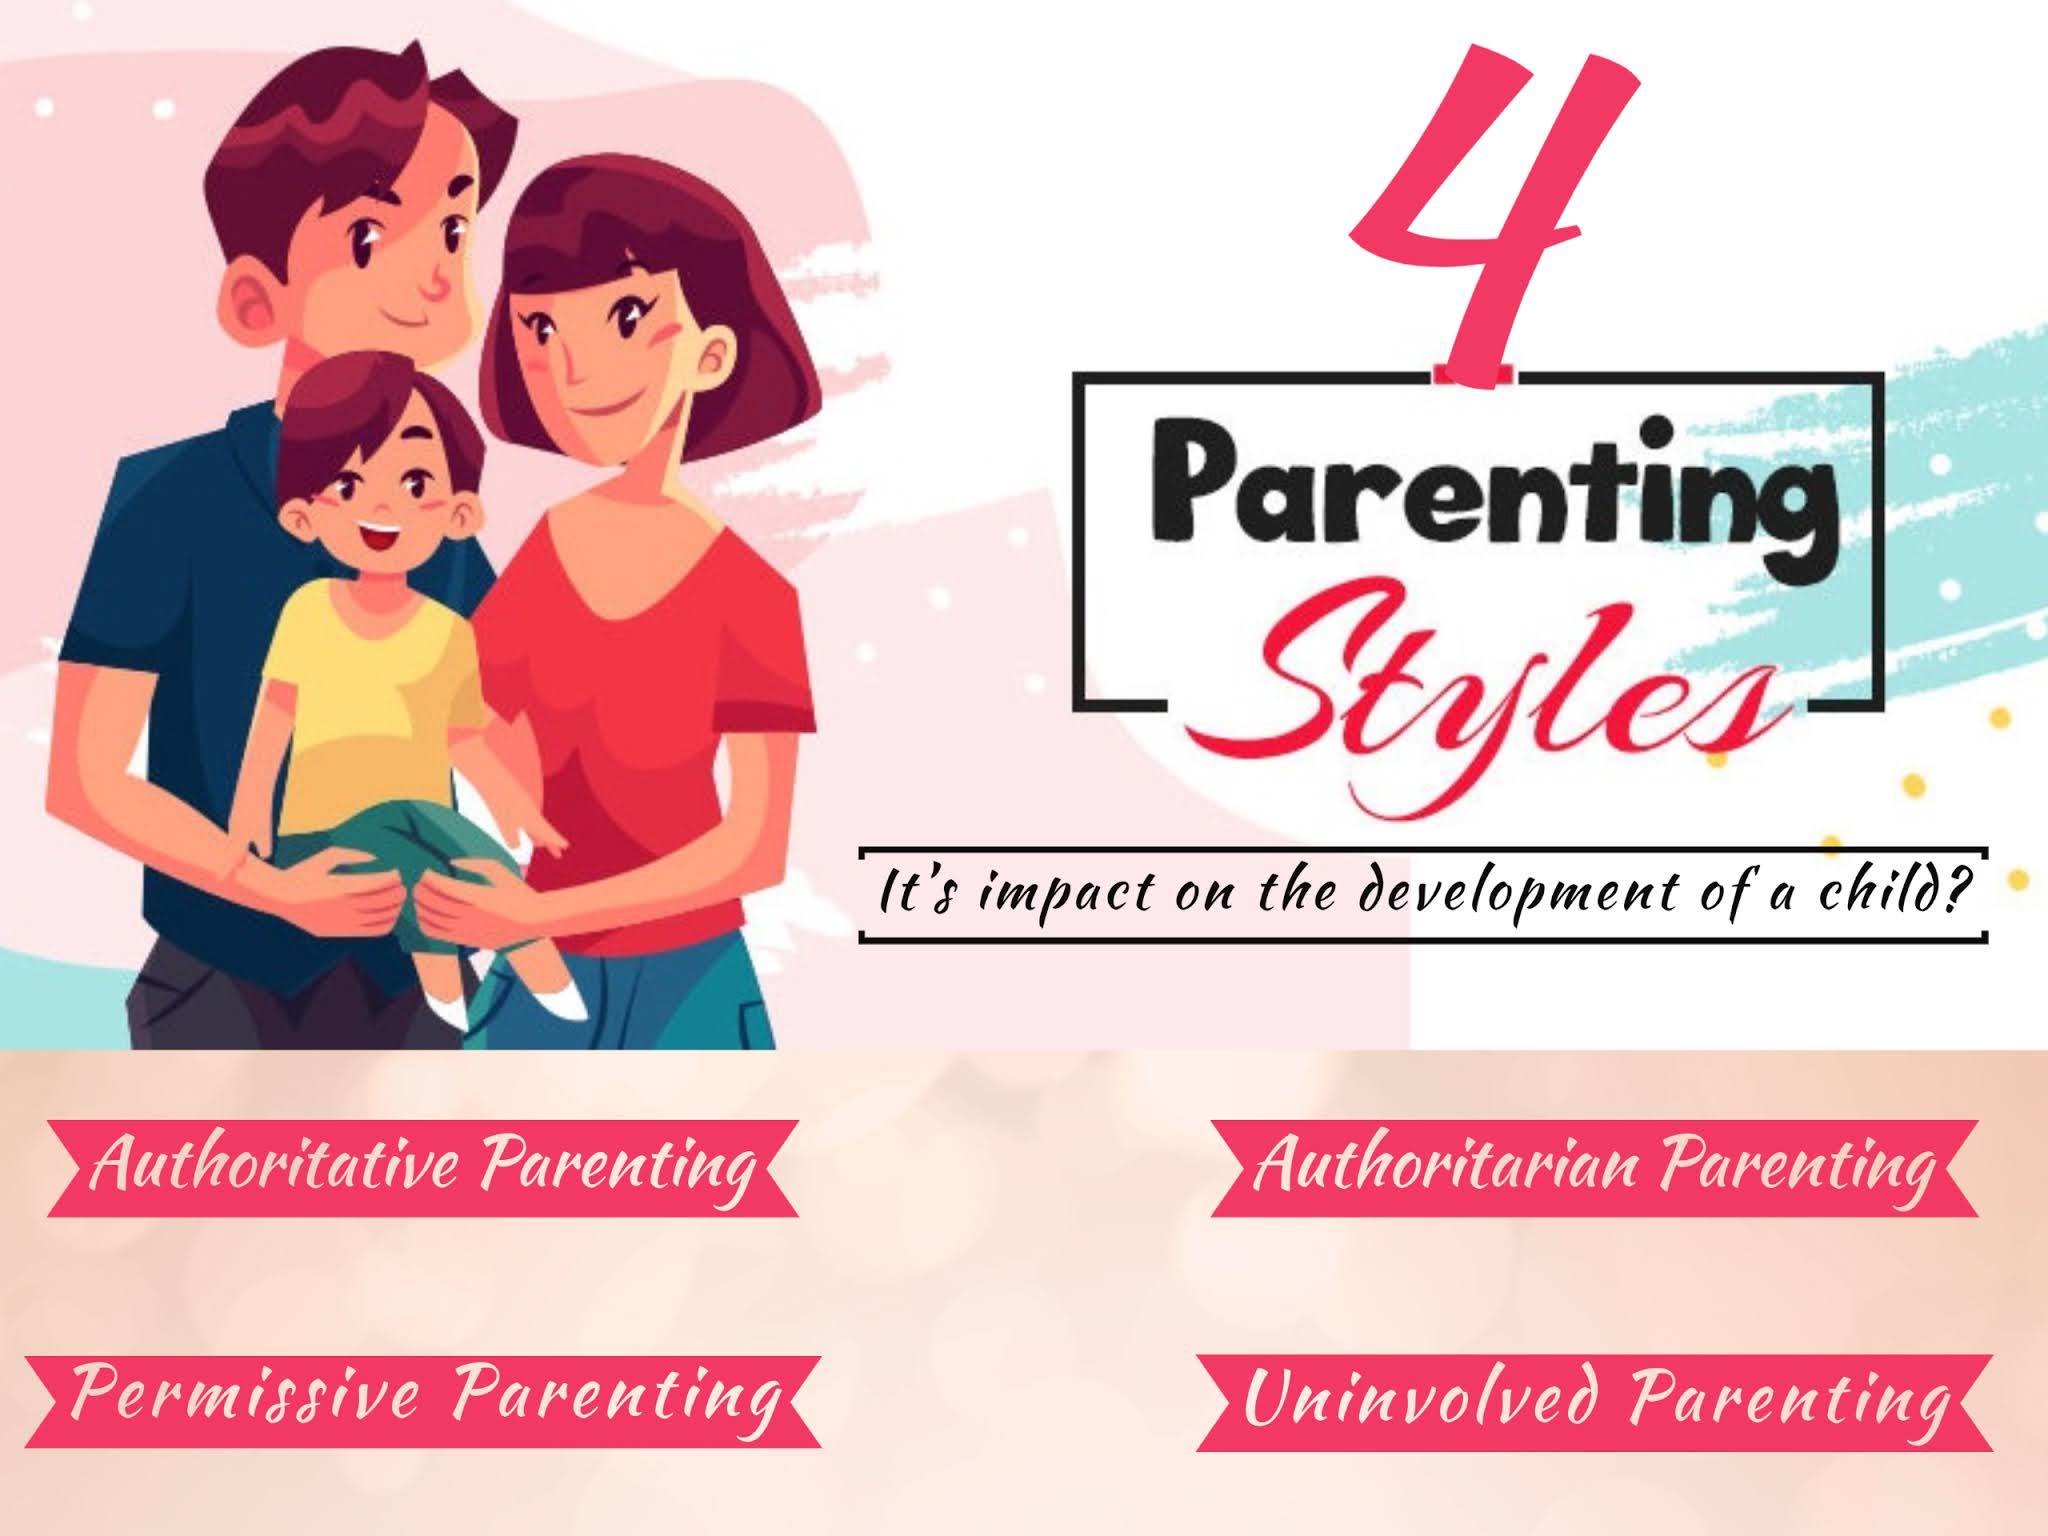 Parenting Styles How Parenting Styles Impact The Development Of A Child